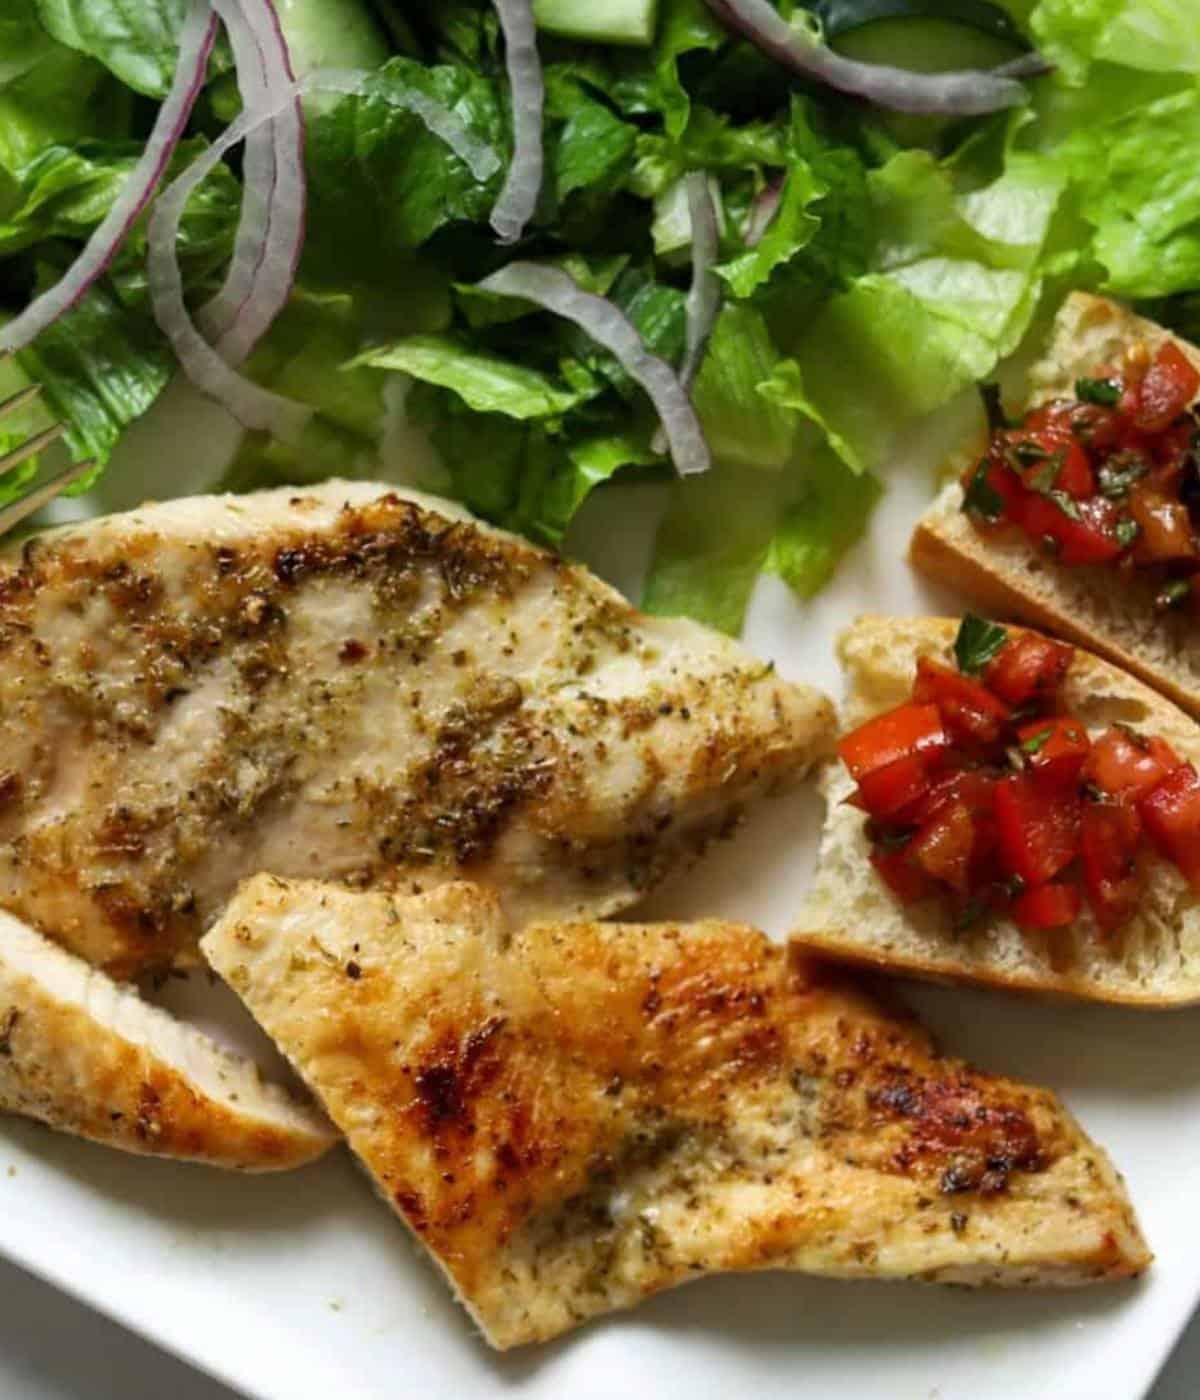 Sauteed chicken breast on plate with salad on side and bread with bruschetta.